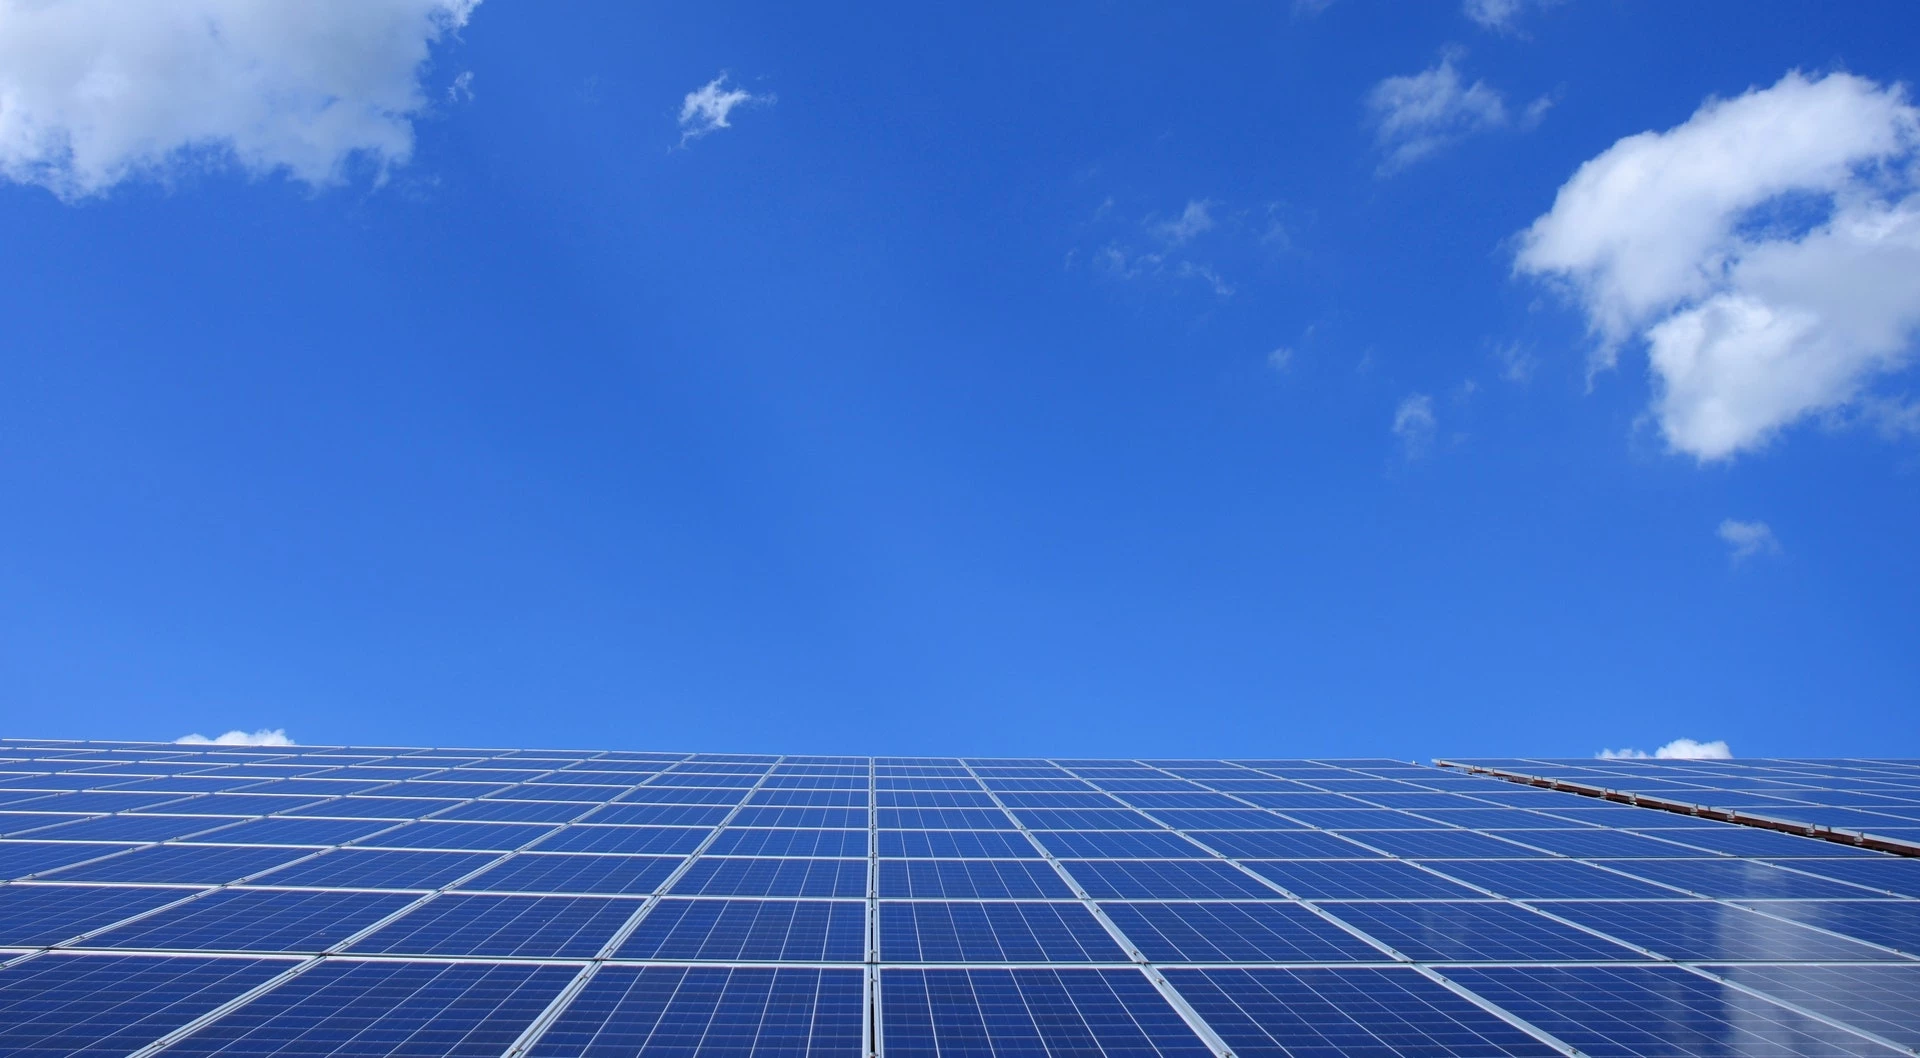 Solar PV still remains an attractive investment, despite end to subsidies, says Inprova Energy